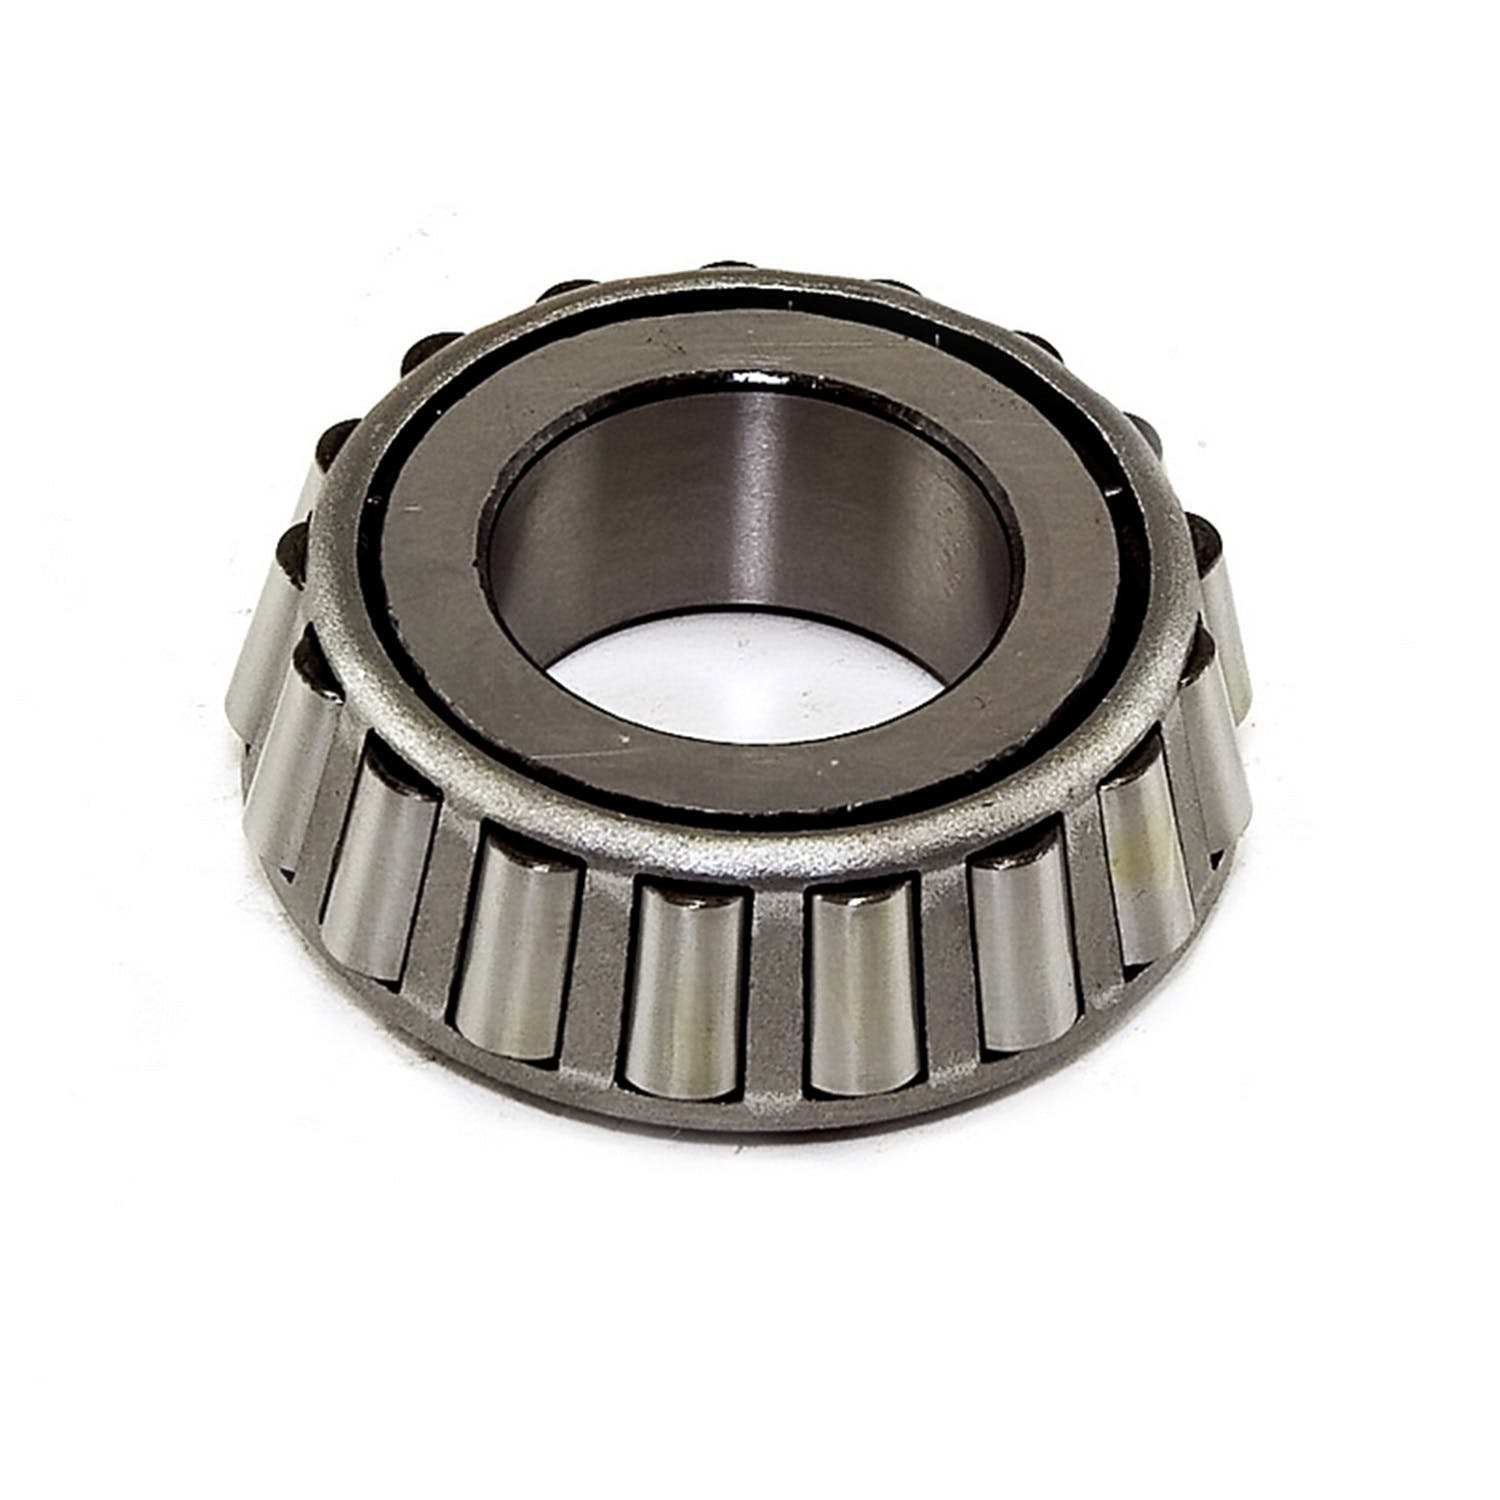 Omix-ADA 18672.02 Front Output Shaft Bearing Cone